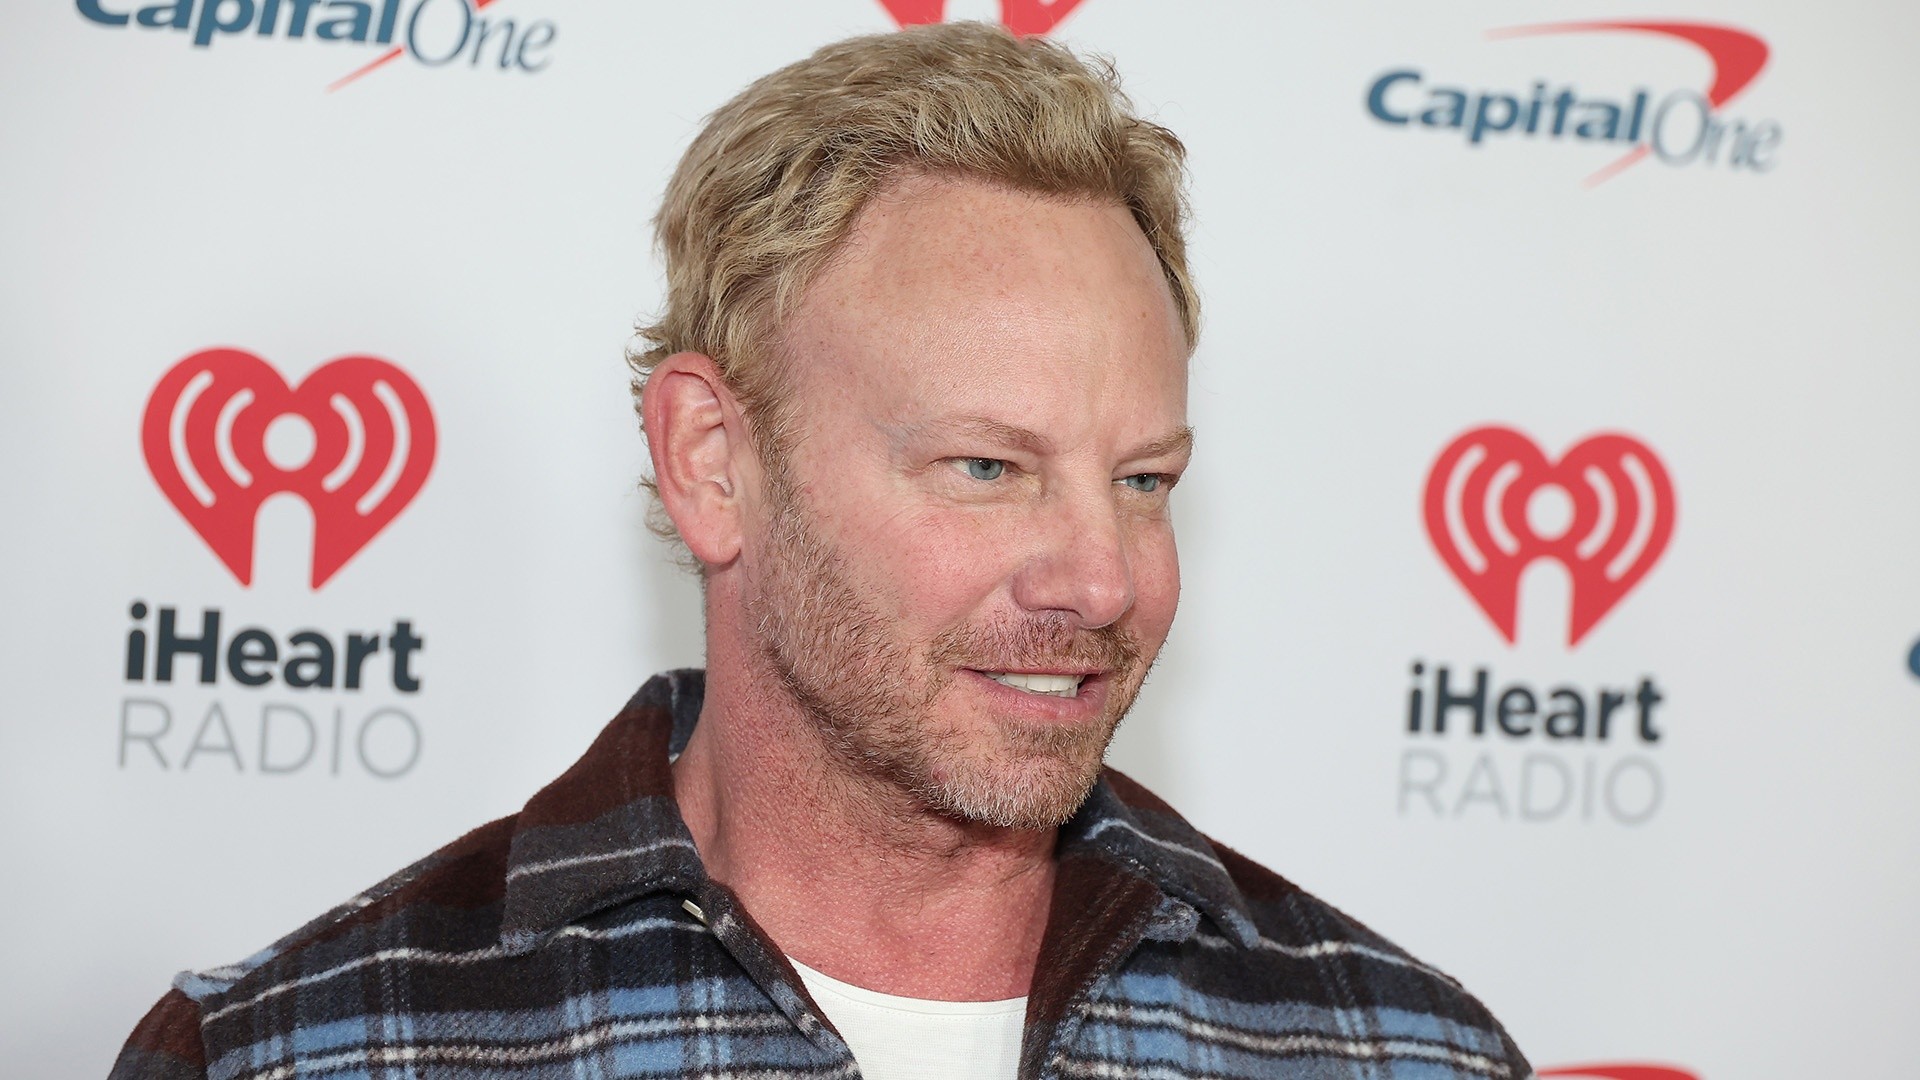 New video shows brawl between Ian Ziering and a group of bikers